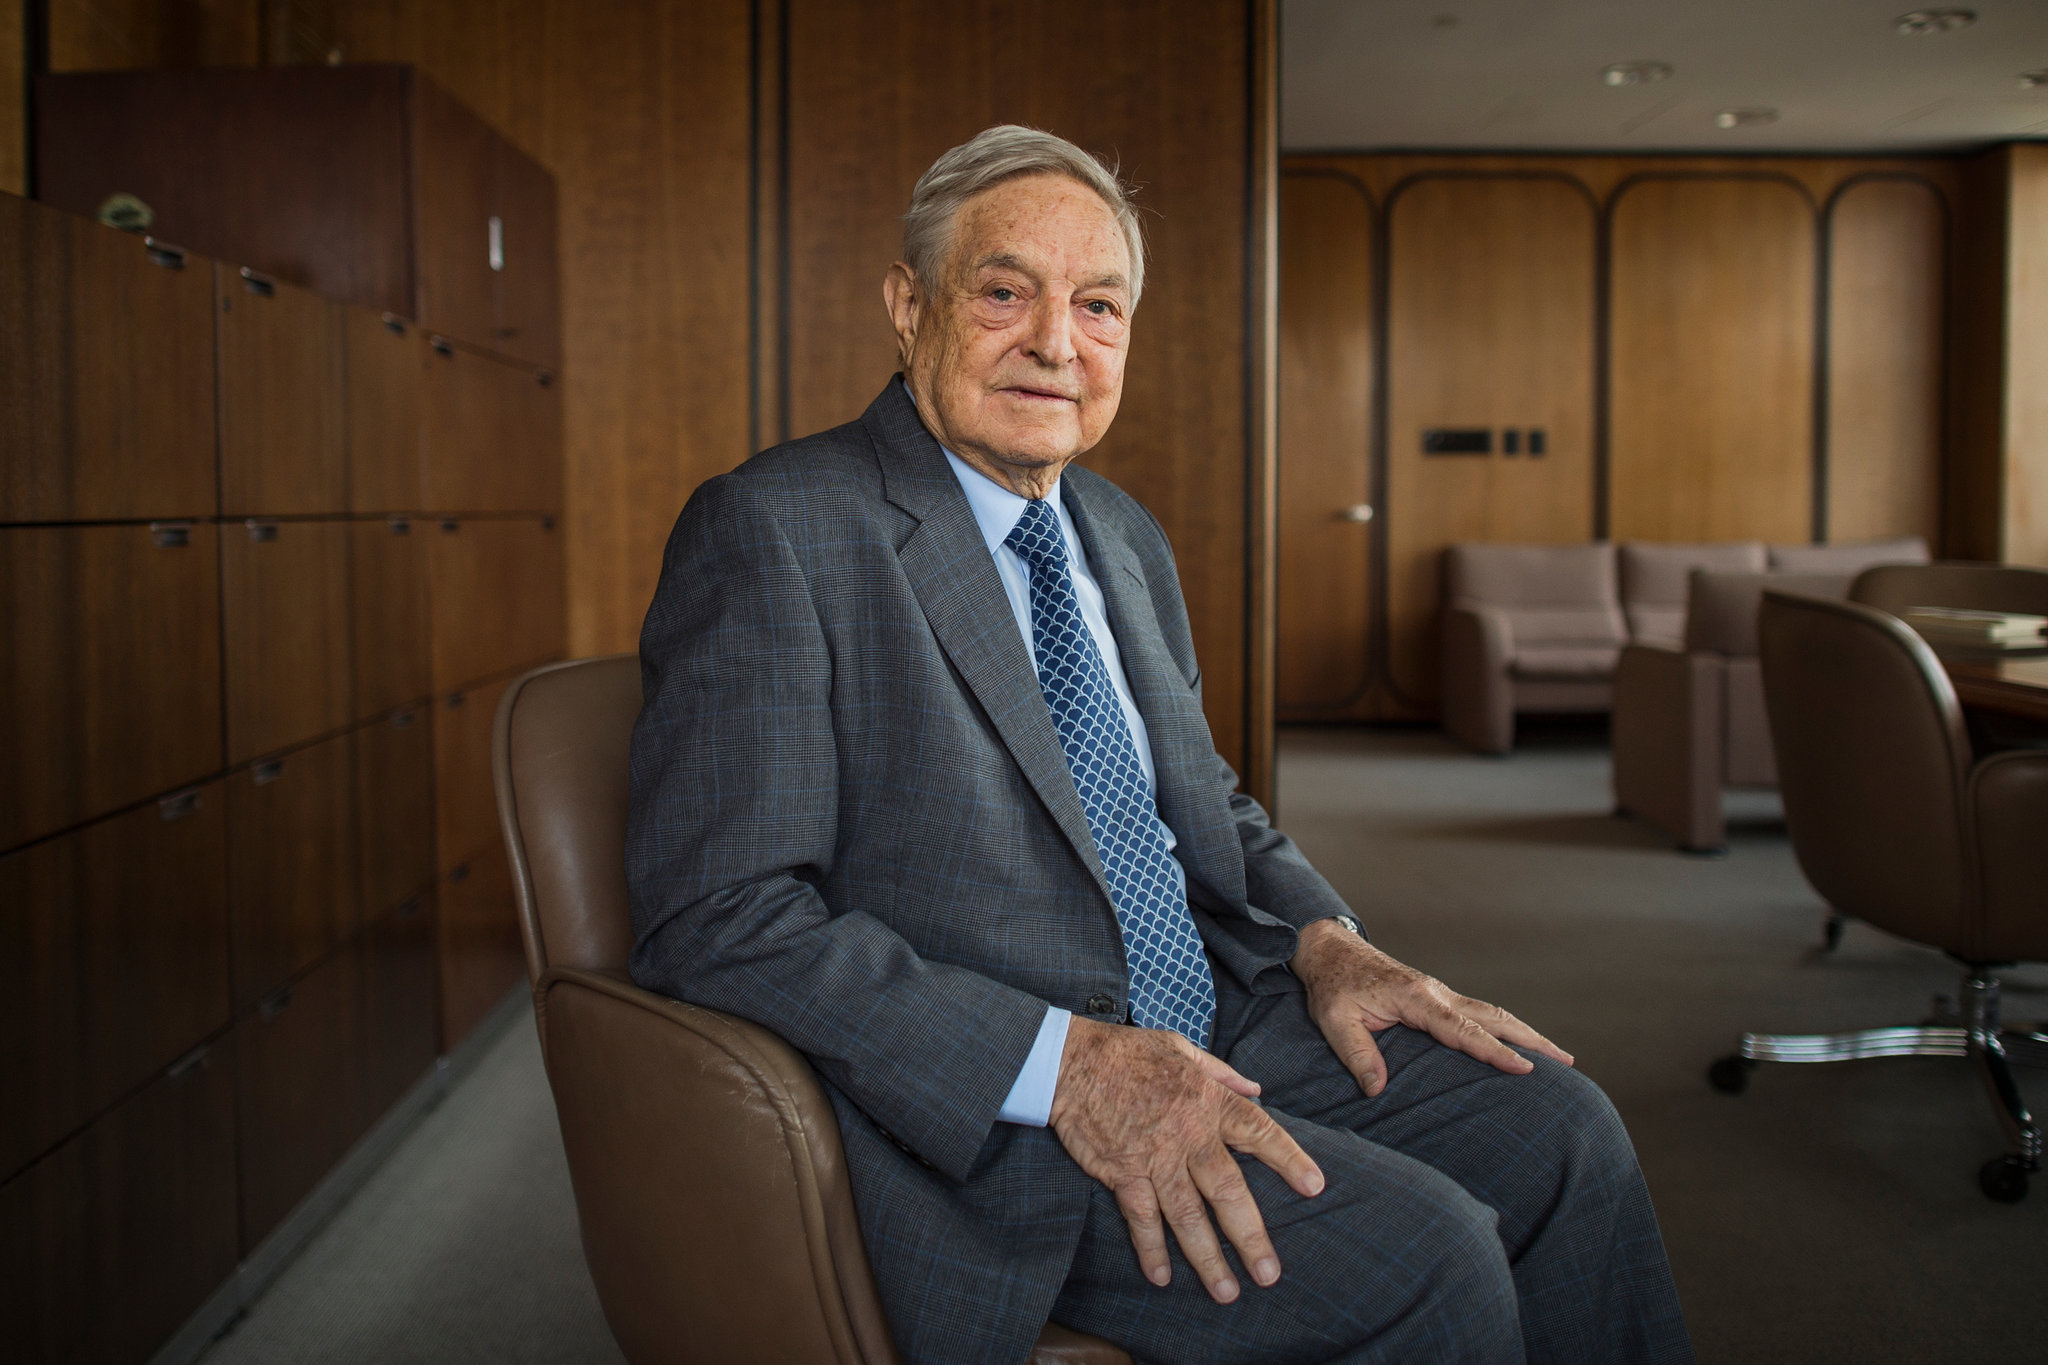 George Soros Transfers Billions to Open Society Foundations   The